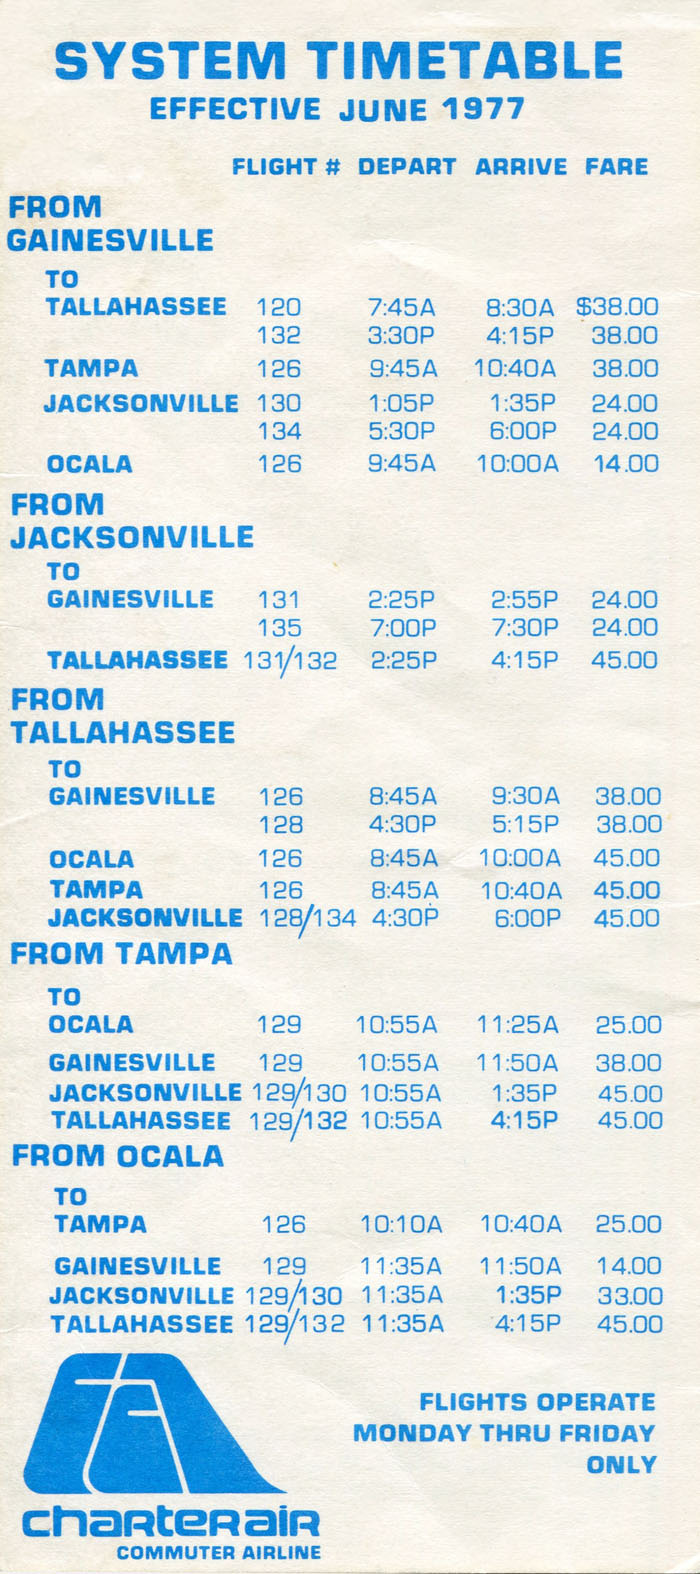 Charter Air Commuter Airline timetable